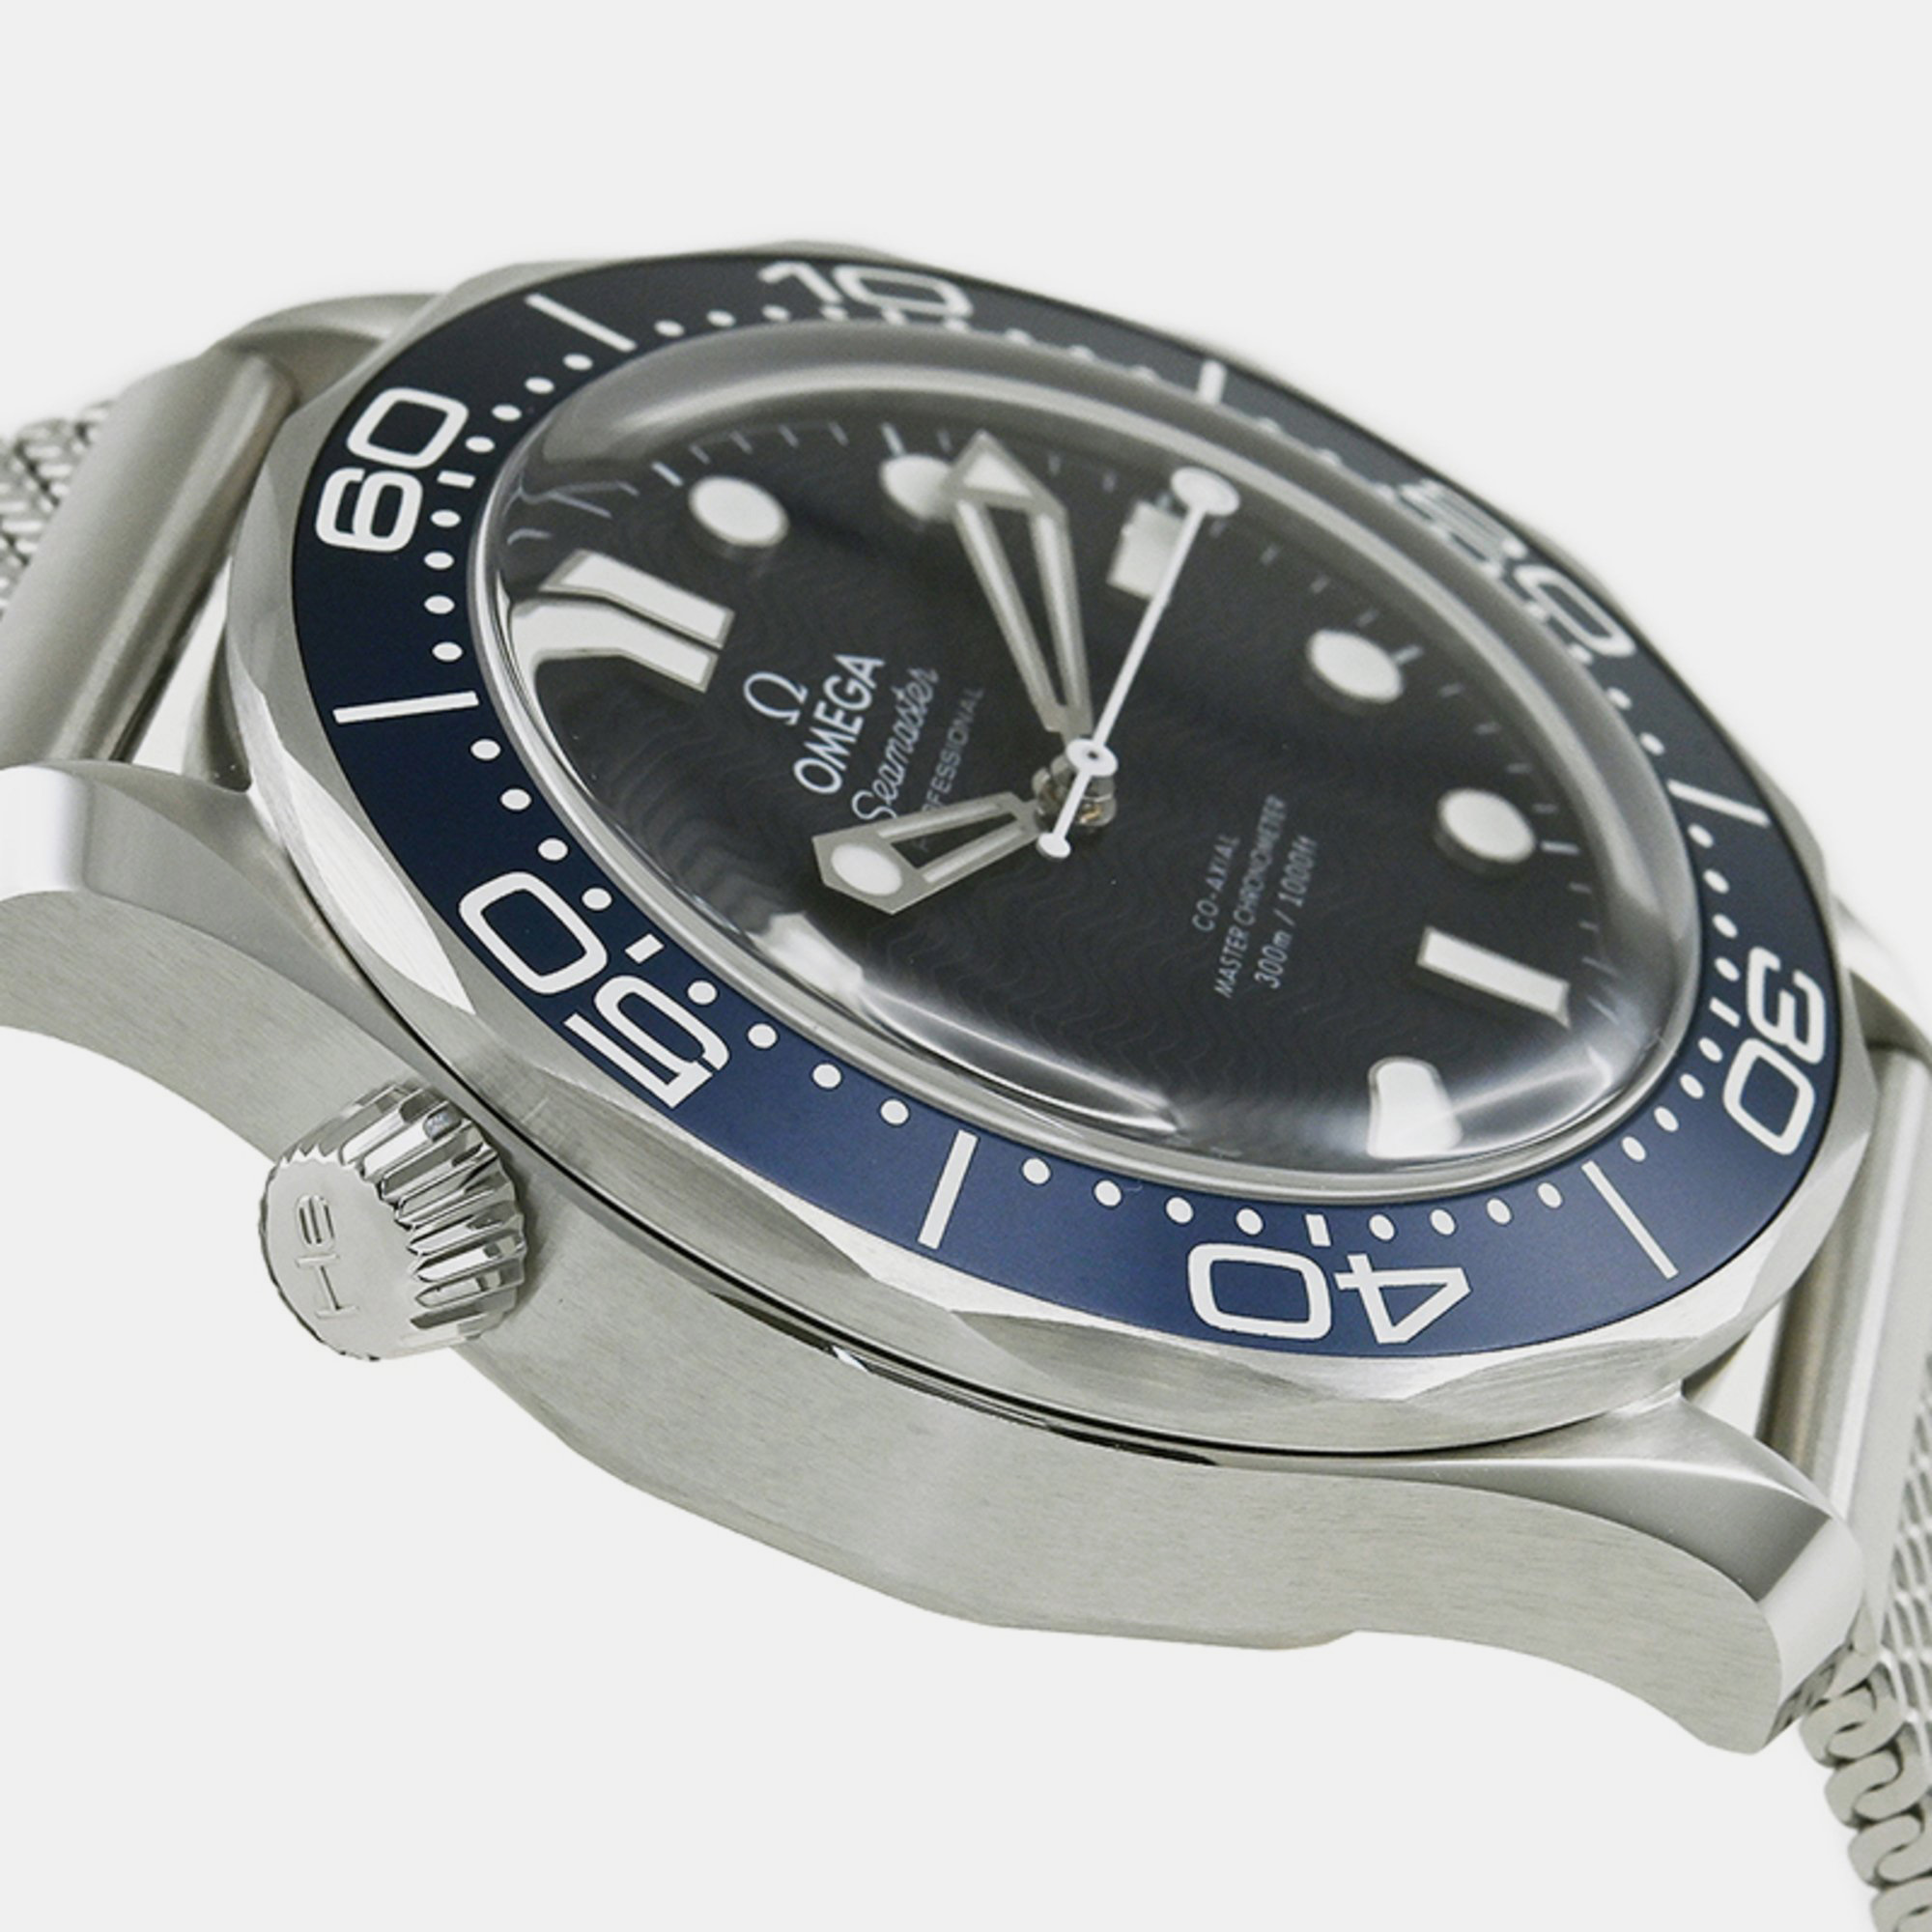 Omega Blue Stainless Steel Seamaster 210.30.42.20.03.002 Automatic Men's Wristwatch 42 Mm